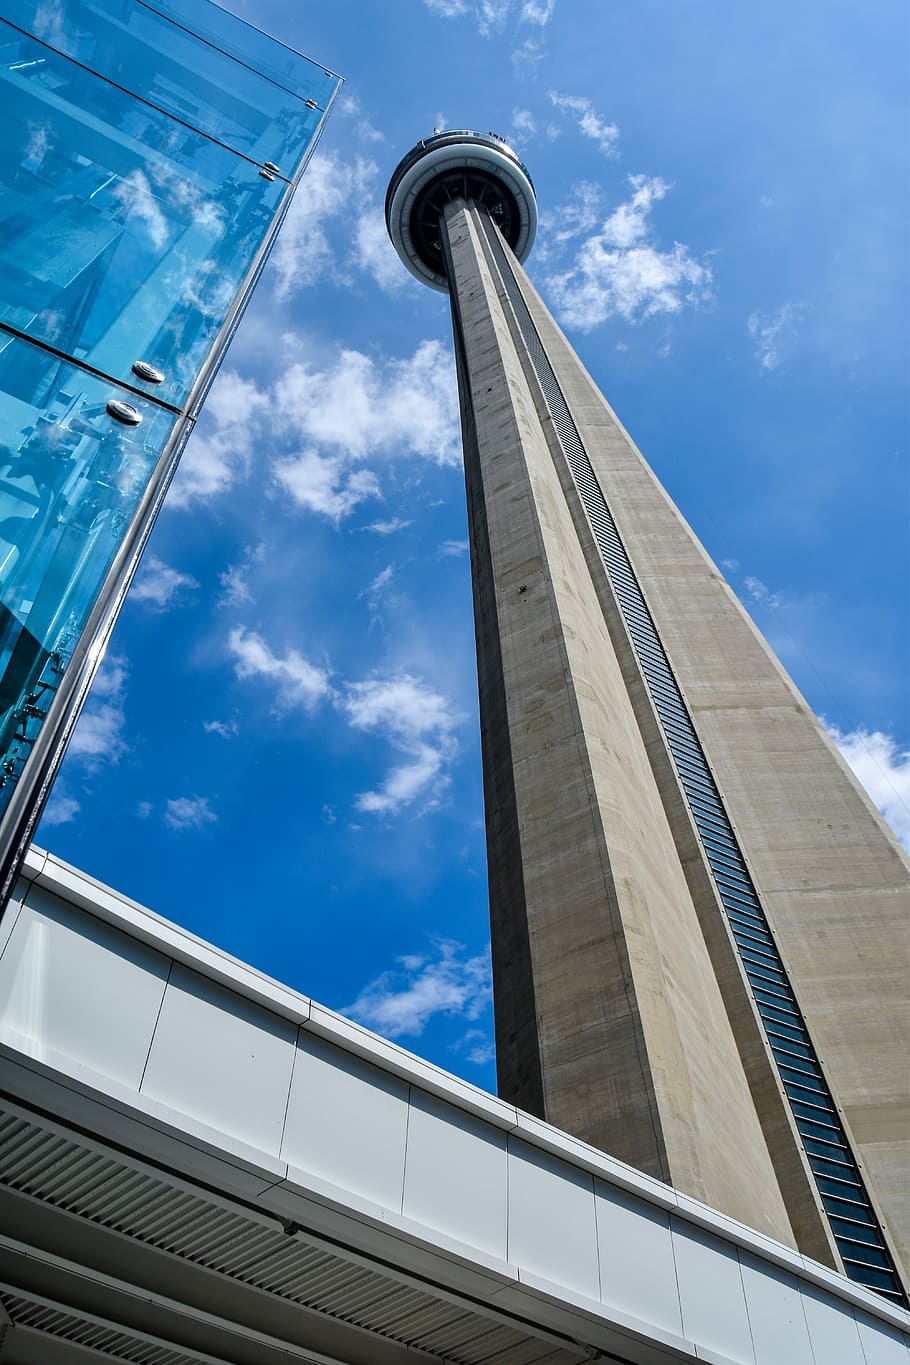 Toronto, Cn Tower, Architecture, Canada, cities, places of interest, tower, attraction, tourists, building